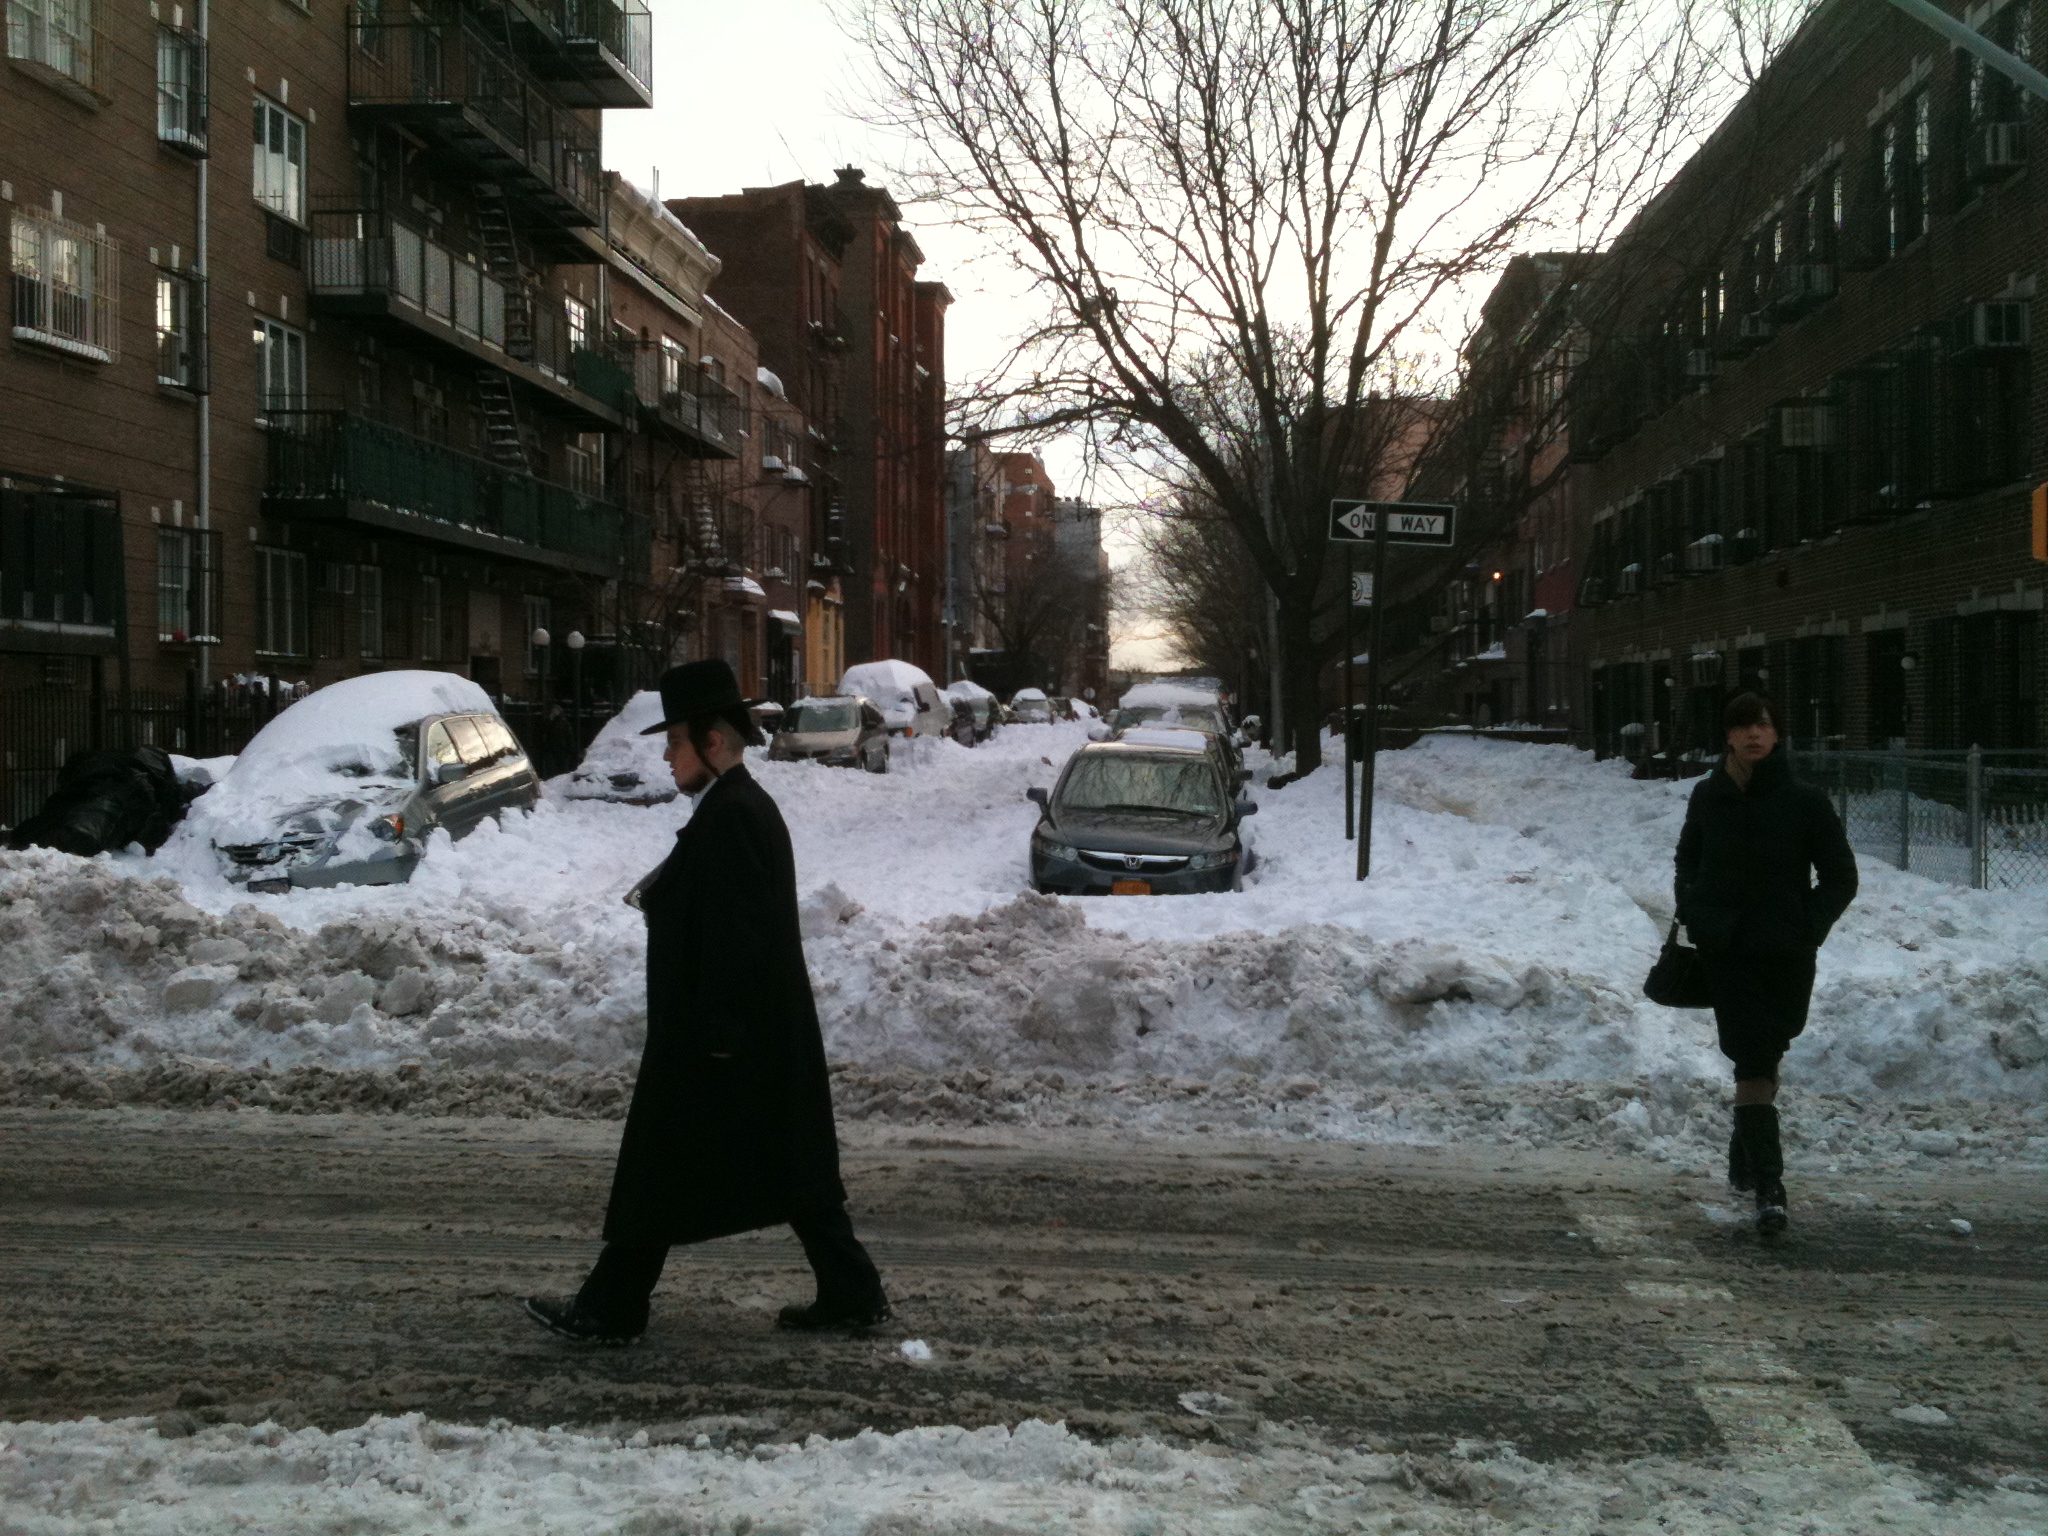 snow-south-8th-street-east-from-bedford-ave-williamsburg-doug-rice.jpg 